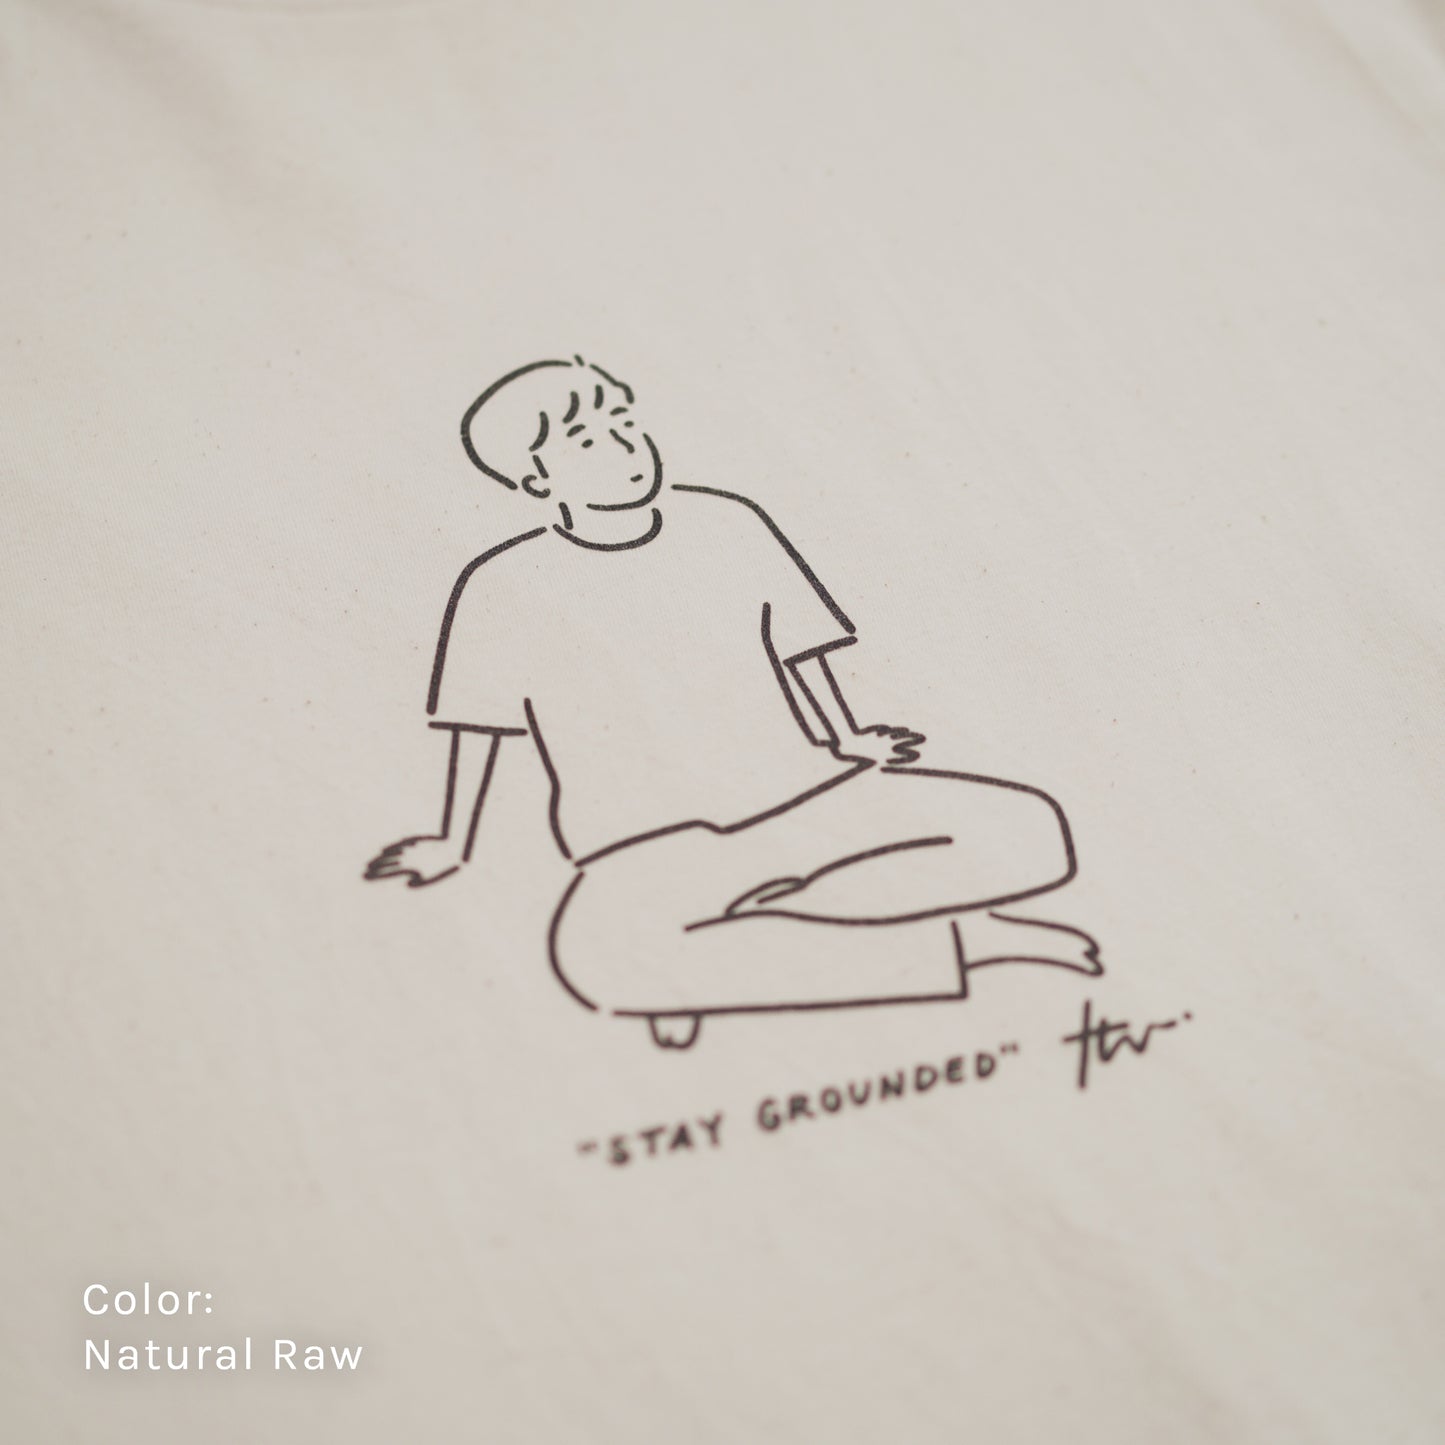 Stay Grounded Tee (Natural Raw)